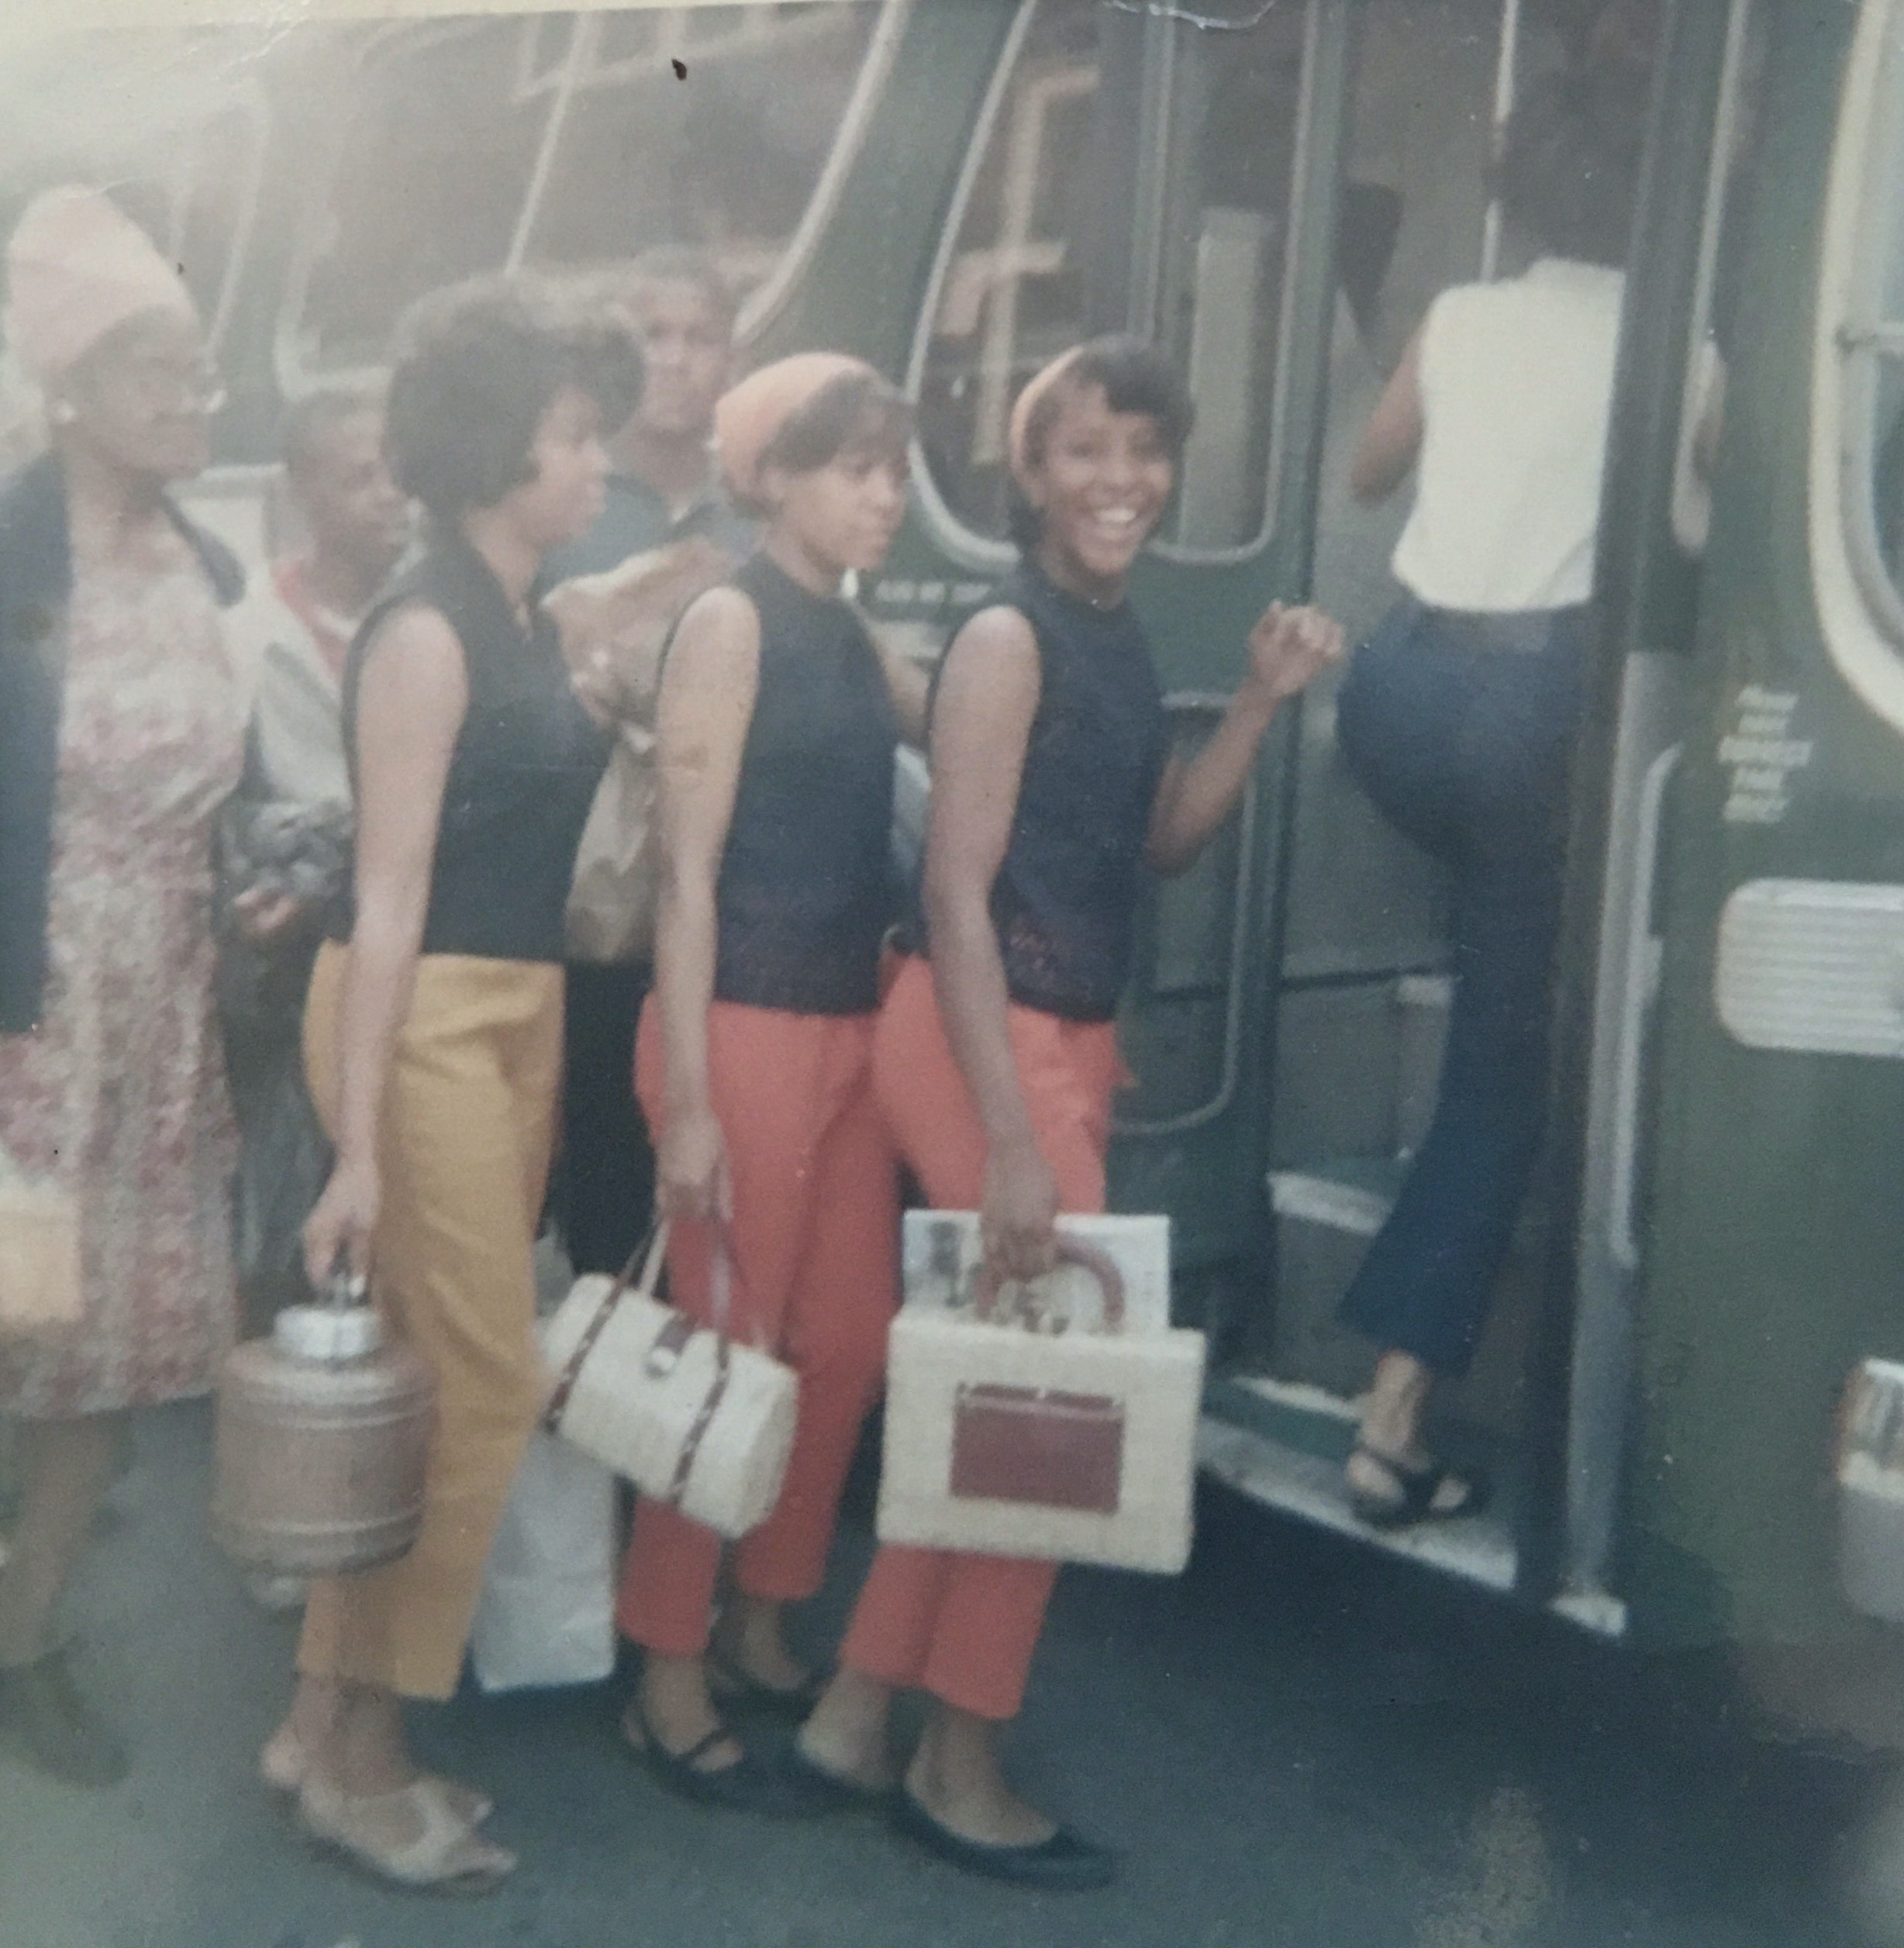 Mrs Rosa Tanner,Lignon Young, Linda Fuller and me boarding a bus either for our choir trip to Atlanta Ga or to the annual church picnic on. Belle Isle. I can’t tell if the year is 1963,1965 or 1966 lol